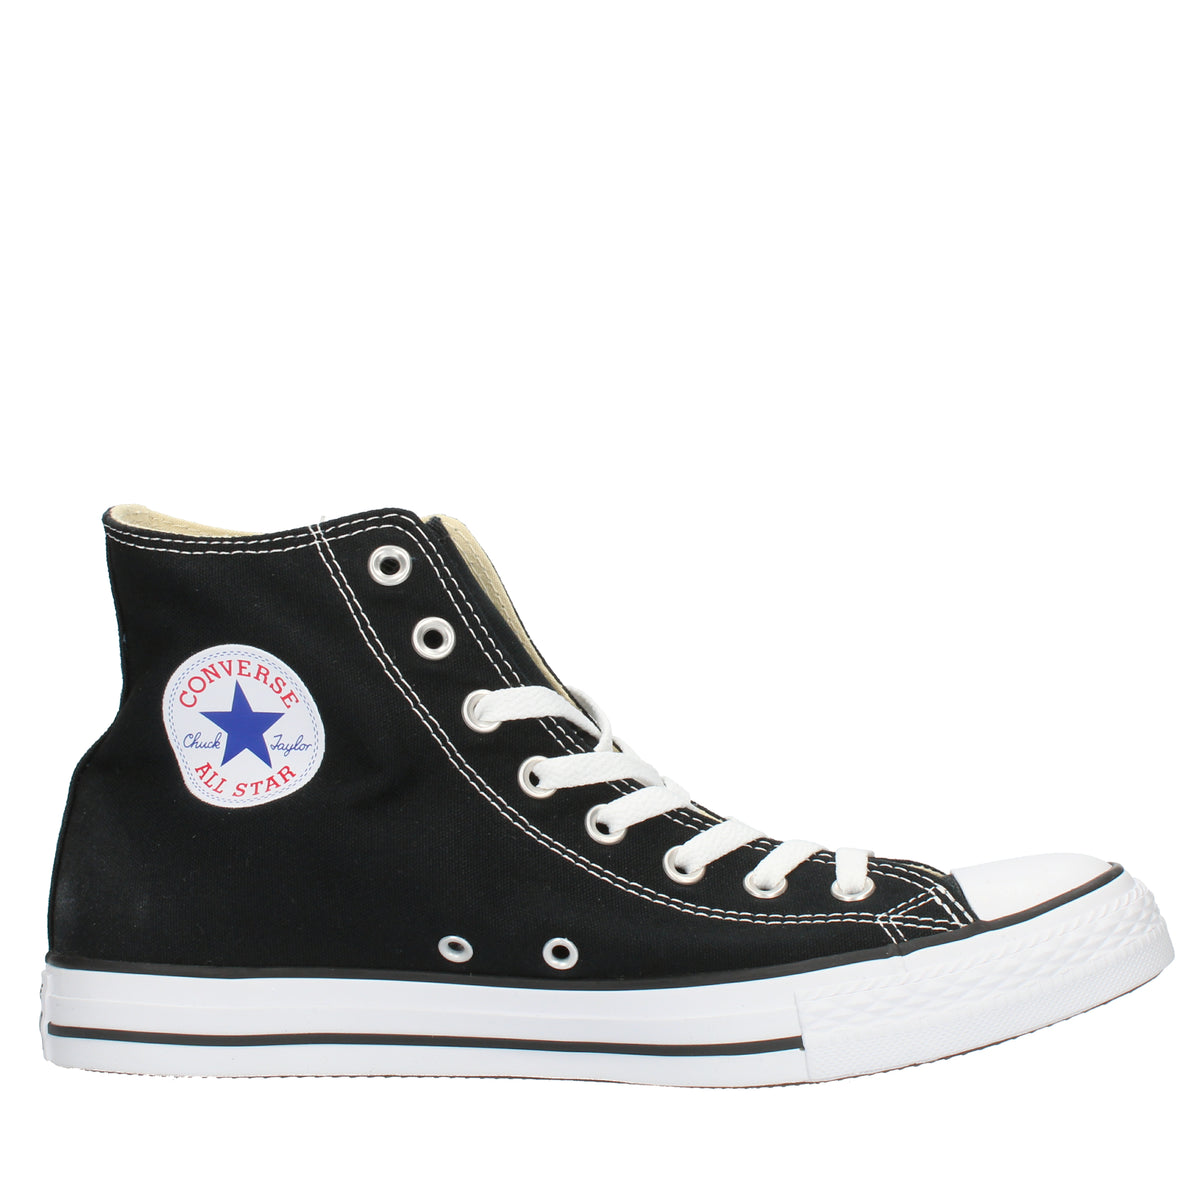 Chuck Taylor All Star Classic Sneakers alte nere unisex